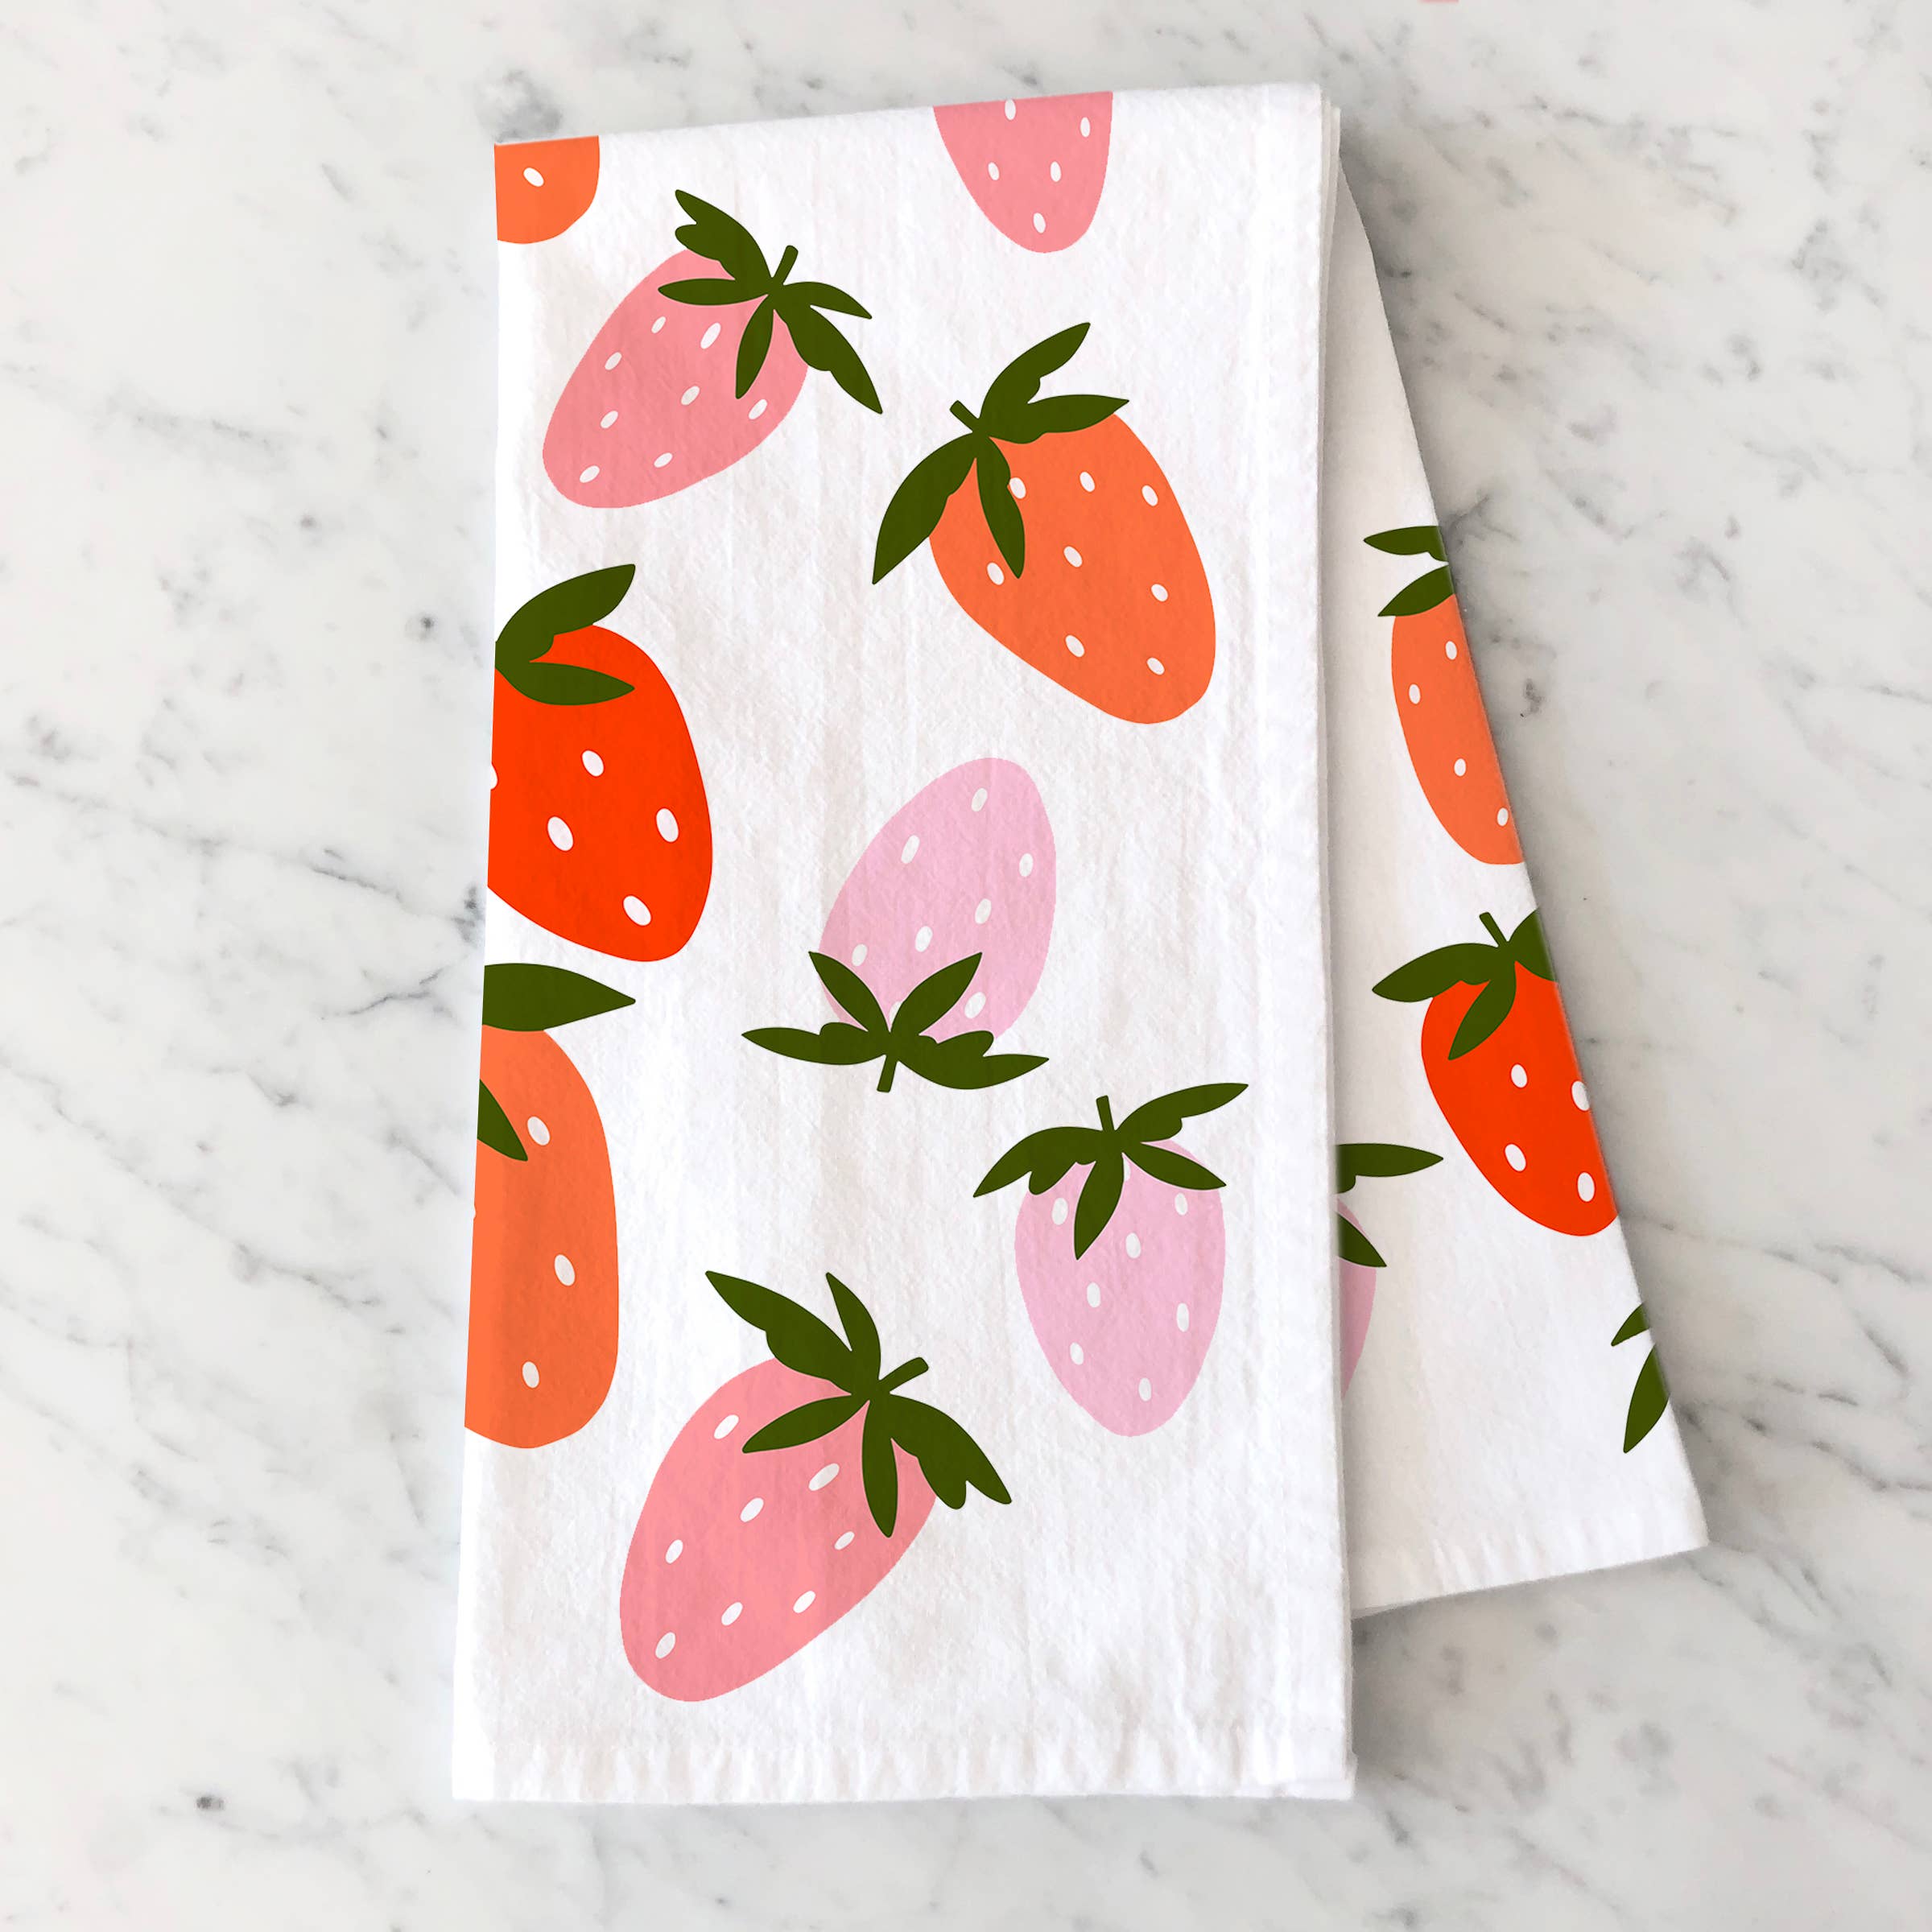 Have A Nice Day - Strawberry Field Tea Towel